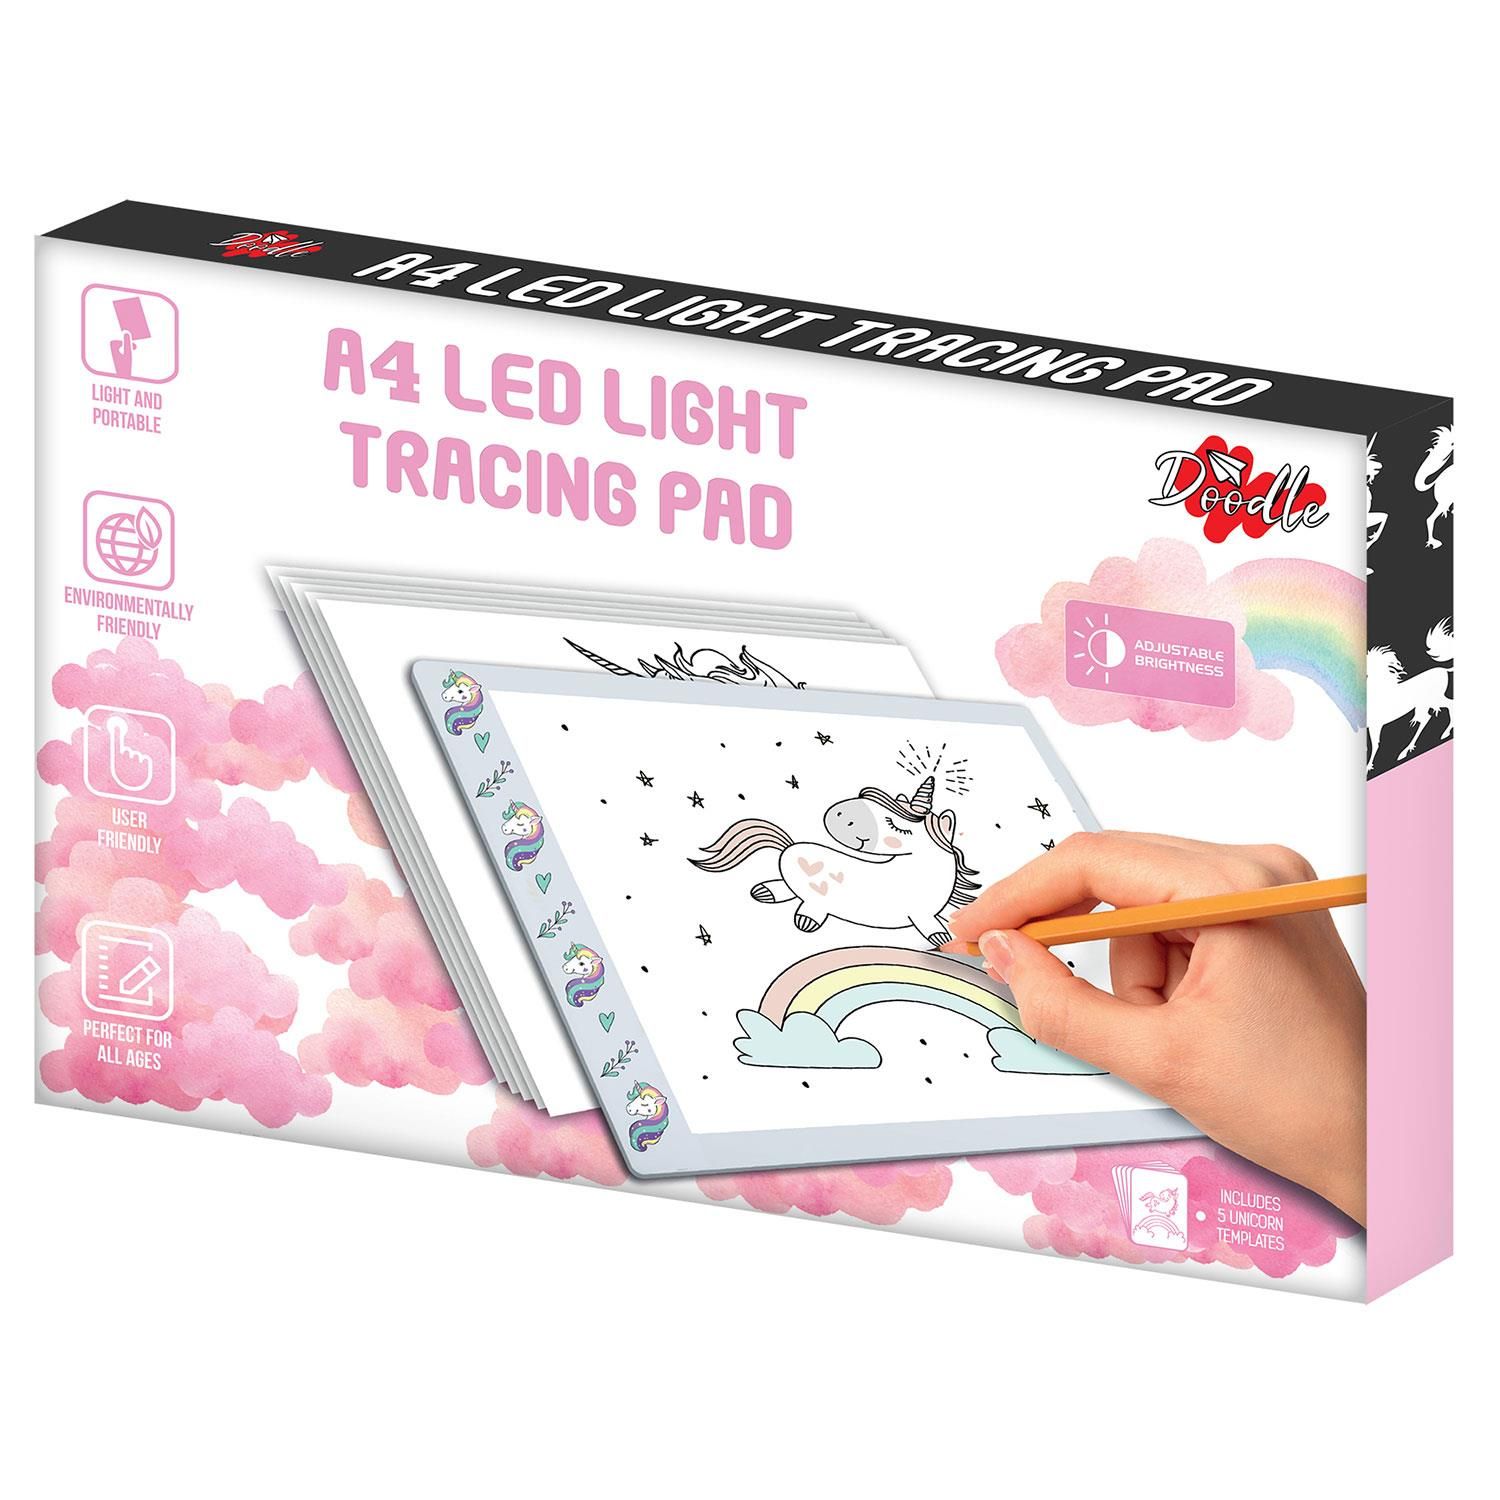 Doodle A4 Ultra-Thin Portable LED Tracing Pad with USB Cable Unicorn.  Whether you are a professional artist or an amateur, take your drawings to the next level with this versatile Doodle LED Tracing light pad. The back-lit background makes it incredibly easy to trace drawings or add to existing works.  Ultra-Thin and Portable: Lightweight (400gm) and ultra-thin (0.5cm) drawing board, you can carry anywhere anytime. The illumination is perfectly even, super bright, and flicker-free.  Adjustable brightness can be set as per your need. Just long-press the power button for step-less dimming on the board and you can set the brightness.  There is horizontal and vertical scaling that helps a lot while sketching.  LED Drawing Board can be connected to a laptop, power-banks, adapters, etc to make use with 2.8W power consumption.  Eyesight protective LED board is a flicker-free and eco-friendly LED. No more sore eyes after long-hour work. amiciVision drawing board

Features :
Acrylic durable strong panel.
A super bright light shines through most types of paper.
One-touch brightness settings.
USB power connection.
Convenient for use on a desk or on your lap.
The touch switch makes it simple to use and turn on or off.
Easily assembled, carried, and stowed away.
Product Material: Acrylic
Power Source: USB Charger (5V-12V/DC)
Light Source: LED light
Screen Size (Diagonal) : 16 Inches/38.6 cm
Screen Resolution : 3840 x 2160
Age Recommendation: 6 years above

Includes:  1x drawing board, 1x USB cable (1.5mlong) and 1x user manual